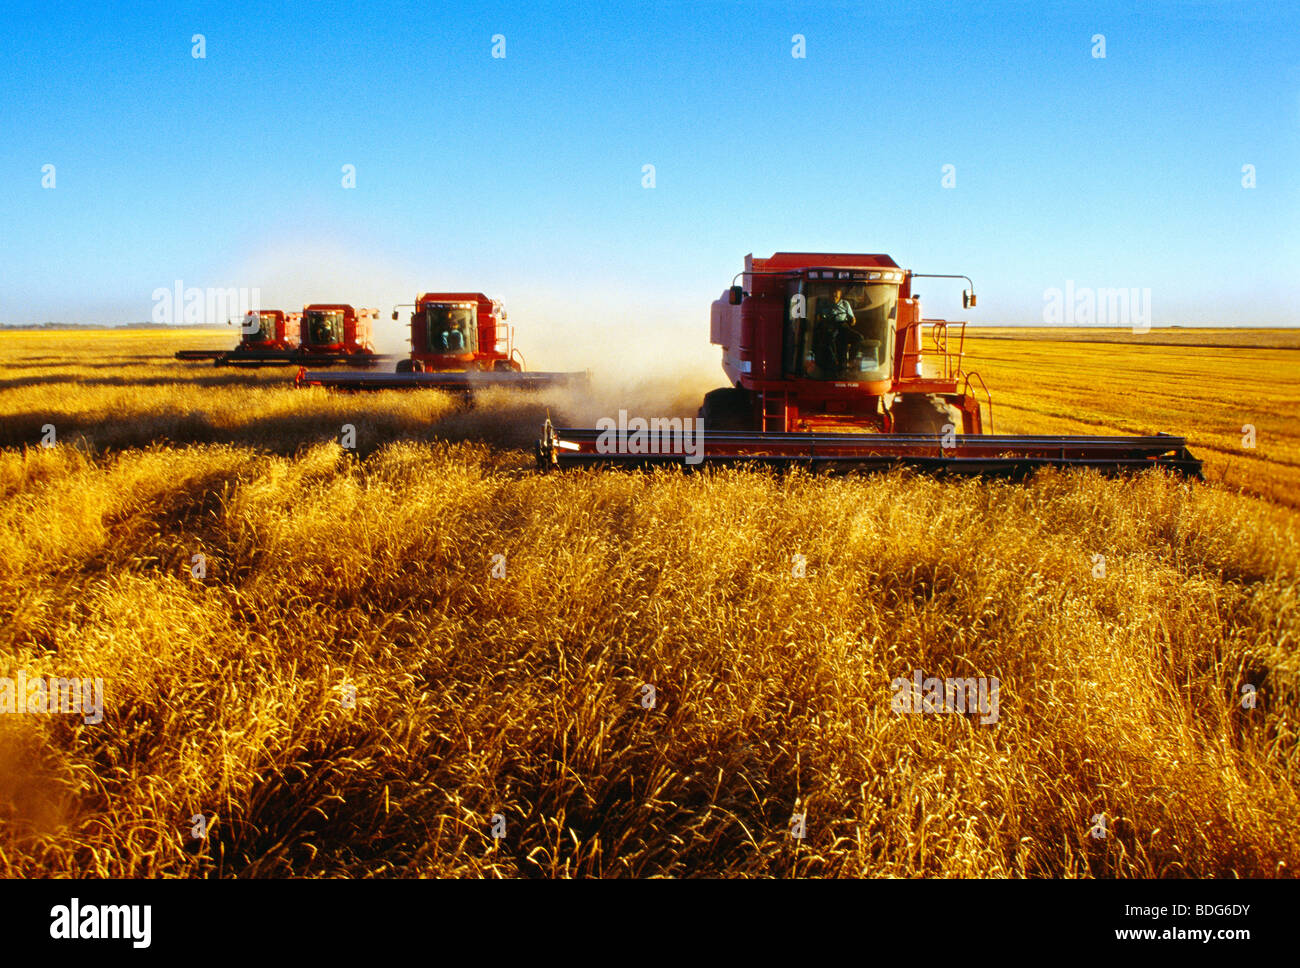 Agriculture - Four red combines in formation harvest wheat in afternoon light / near Dufrost, Manitoba, Canada. Stock Photo